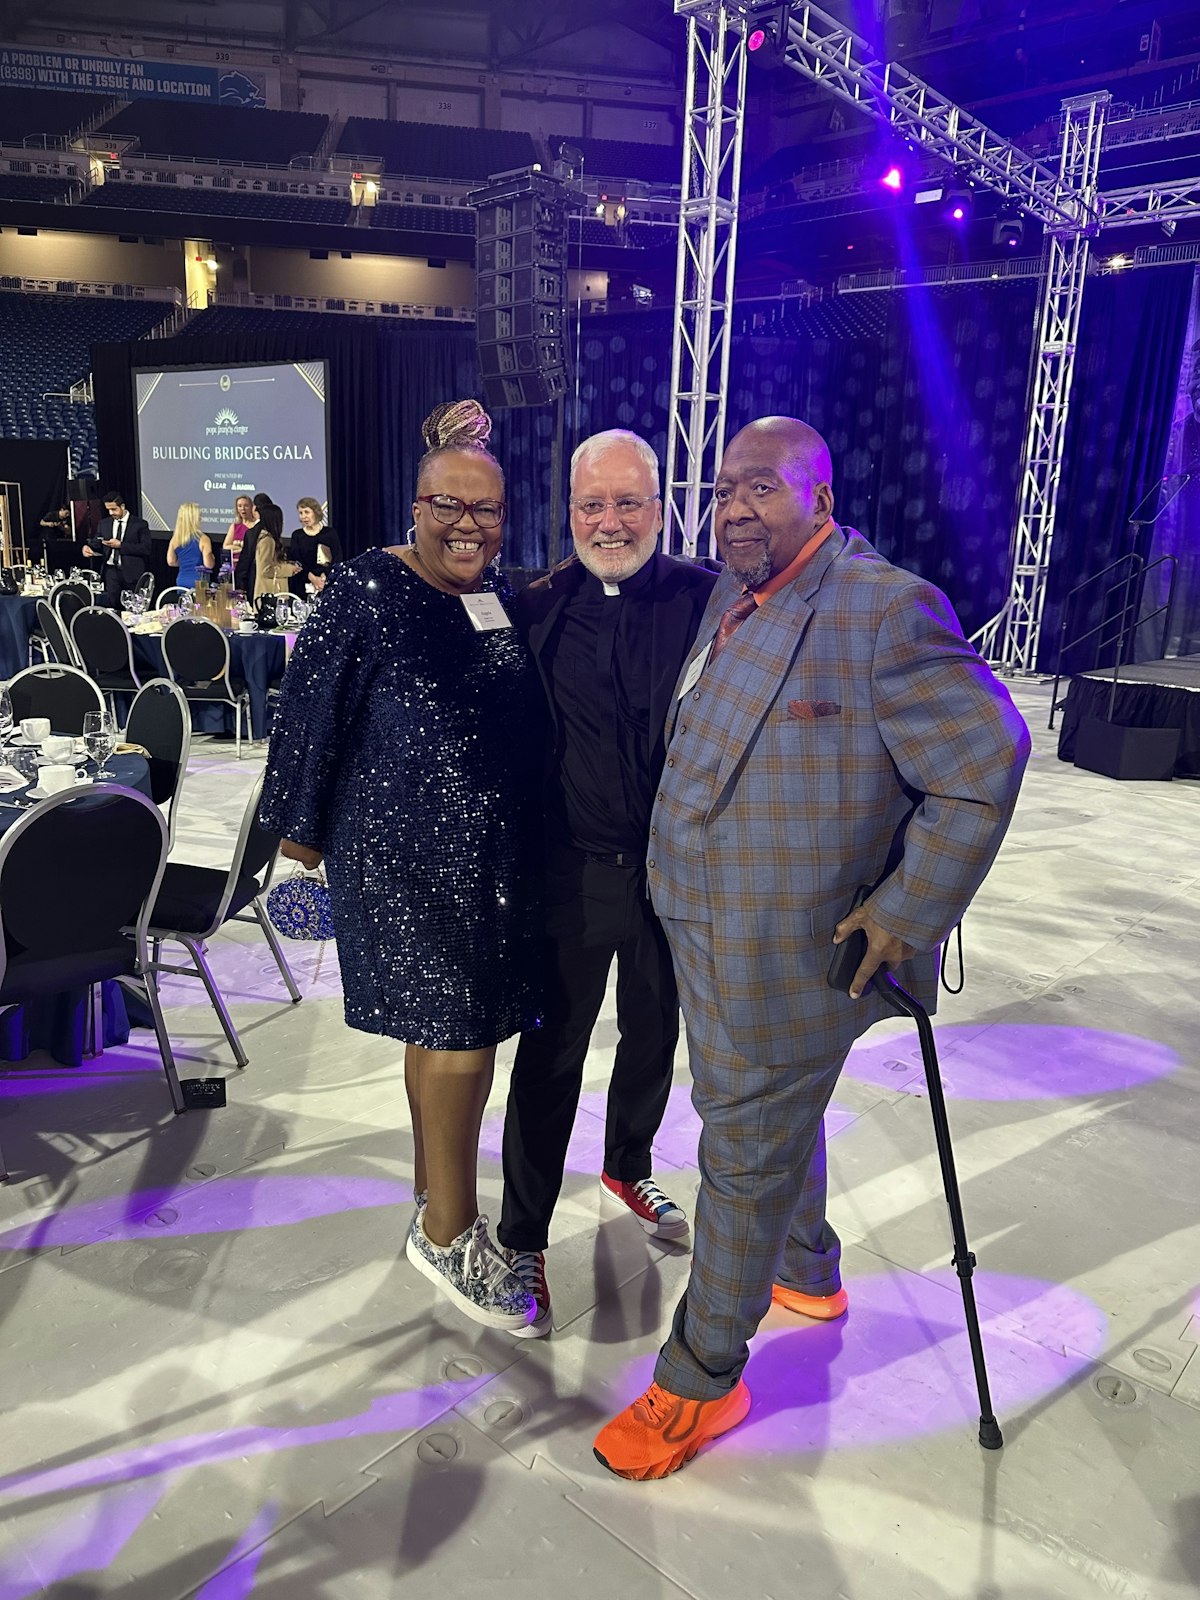 From left to right, Angela Vann, Fr. Tim McCabe, SJ, and Arnold Vann smile during the Pope Francis Center's "Building Bridges Gala" on April 11.